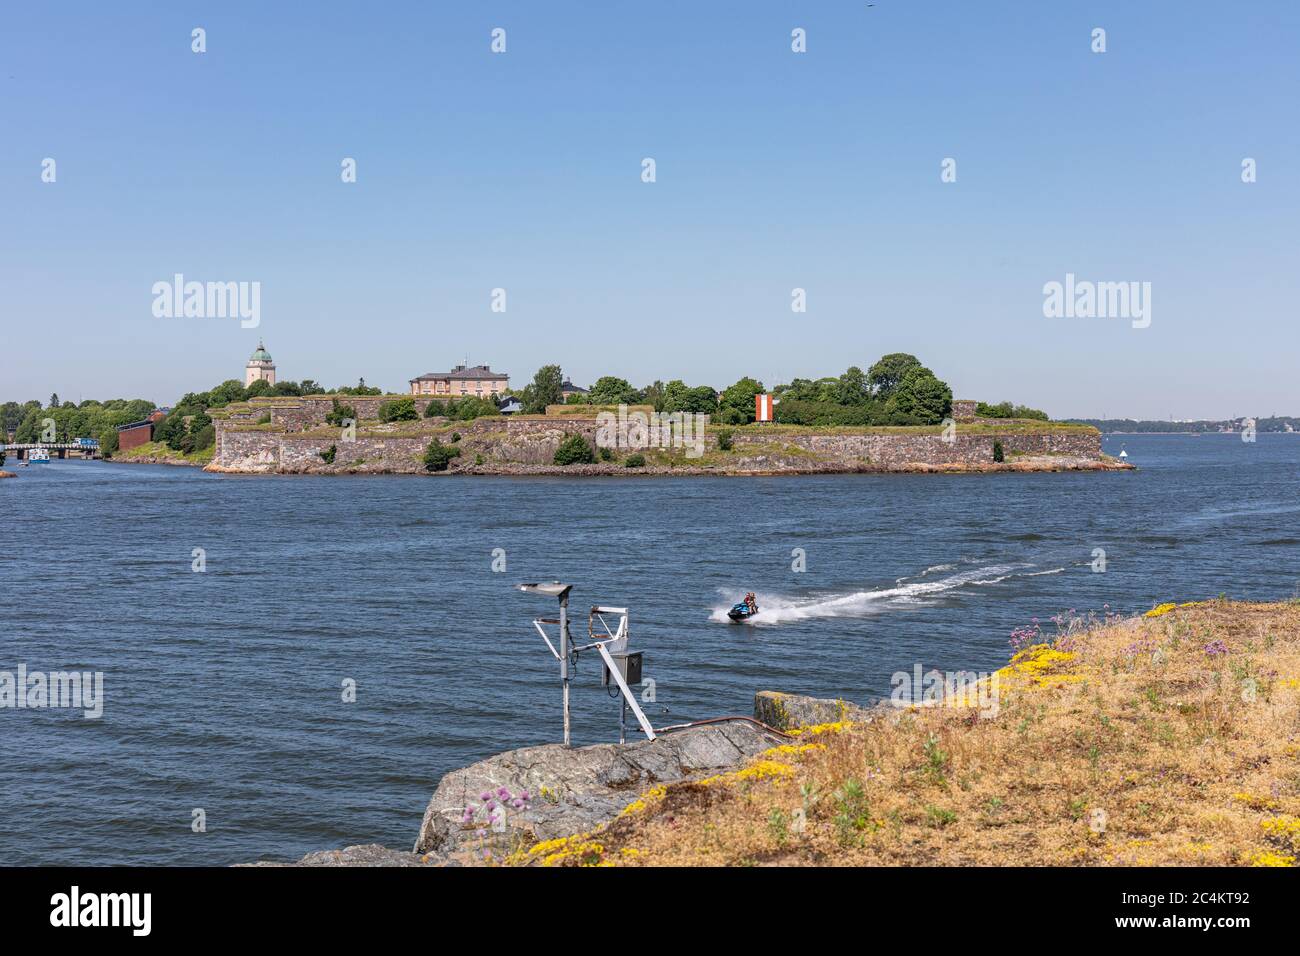 Suomenlinna sea fortress - an UNESCO World Heritage site - viewed from Vallisaari island, about 4 km southeast of the city center of Helsinki, Finland Stock Photo